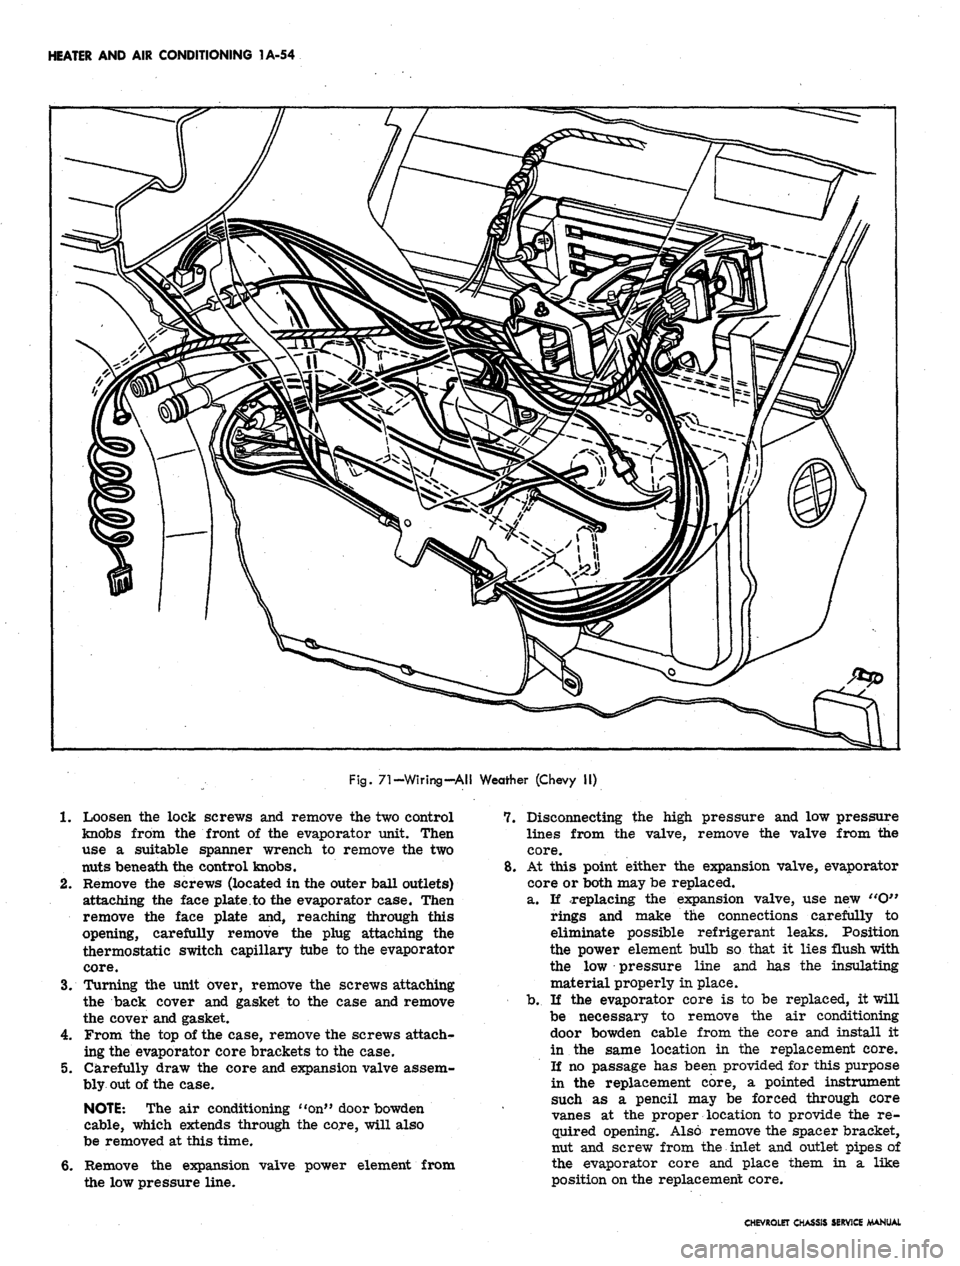 CHEVROLET CAMARO 1967 1.G Chassis Workshop Manual 
HEATER AND AIR CONDITIONING 1A-54

Fig.
 71-Wiring-AH Weather (Chevy II)

1.
 Loosen the lock screws and remove the two control

knobs from the front of the evaporator unit. Then

use a suitable span